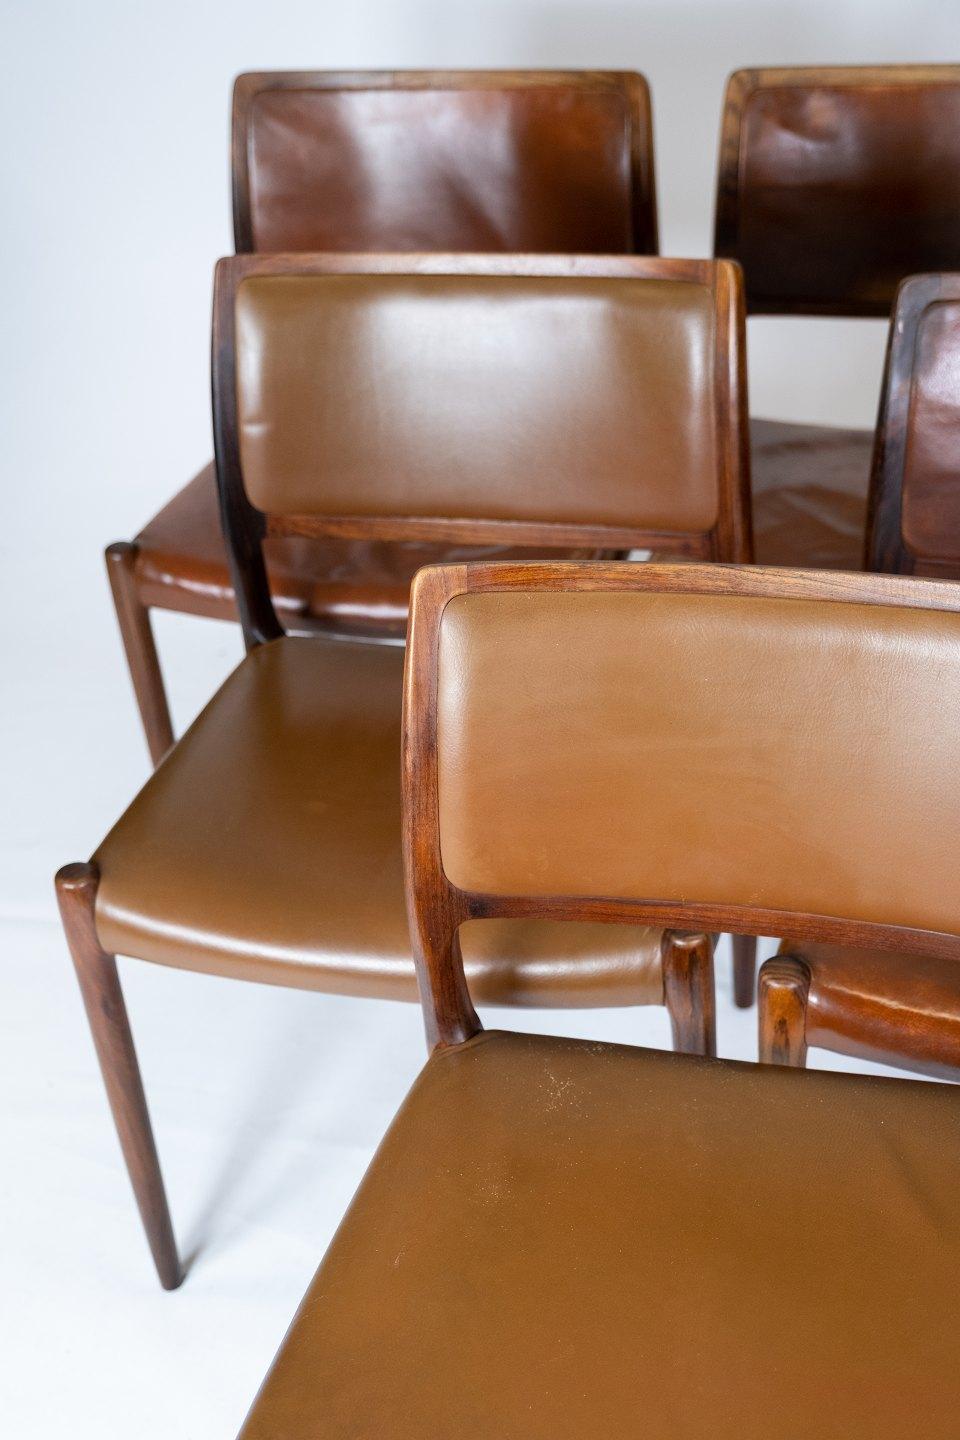 Set of 6 dining chairs, model 80, in rosewood and cognac colored leather designed by N.O. Møller. The chairs in are in great vintage condition and from the 1960s.
Measures: H 79 cm, W 50 cm, D 45 cm and SH 45 cm.